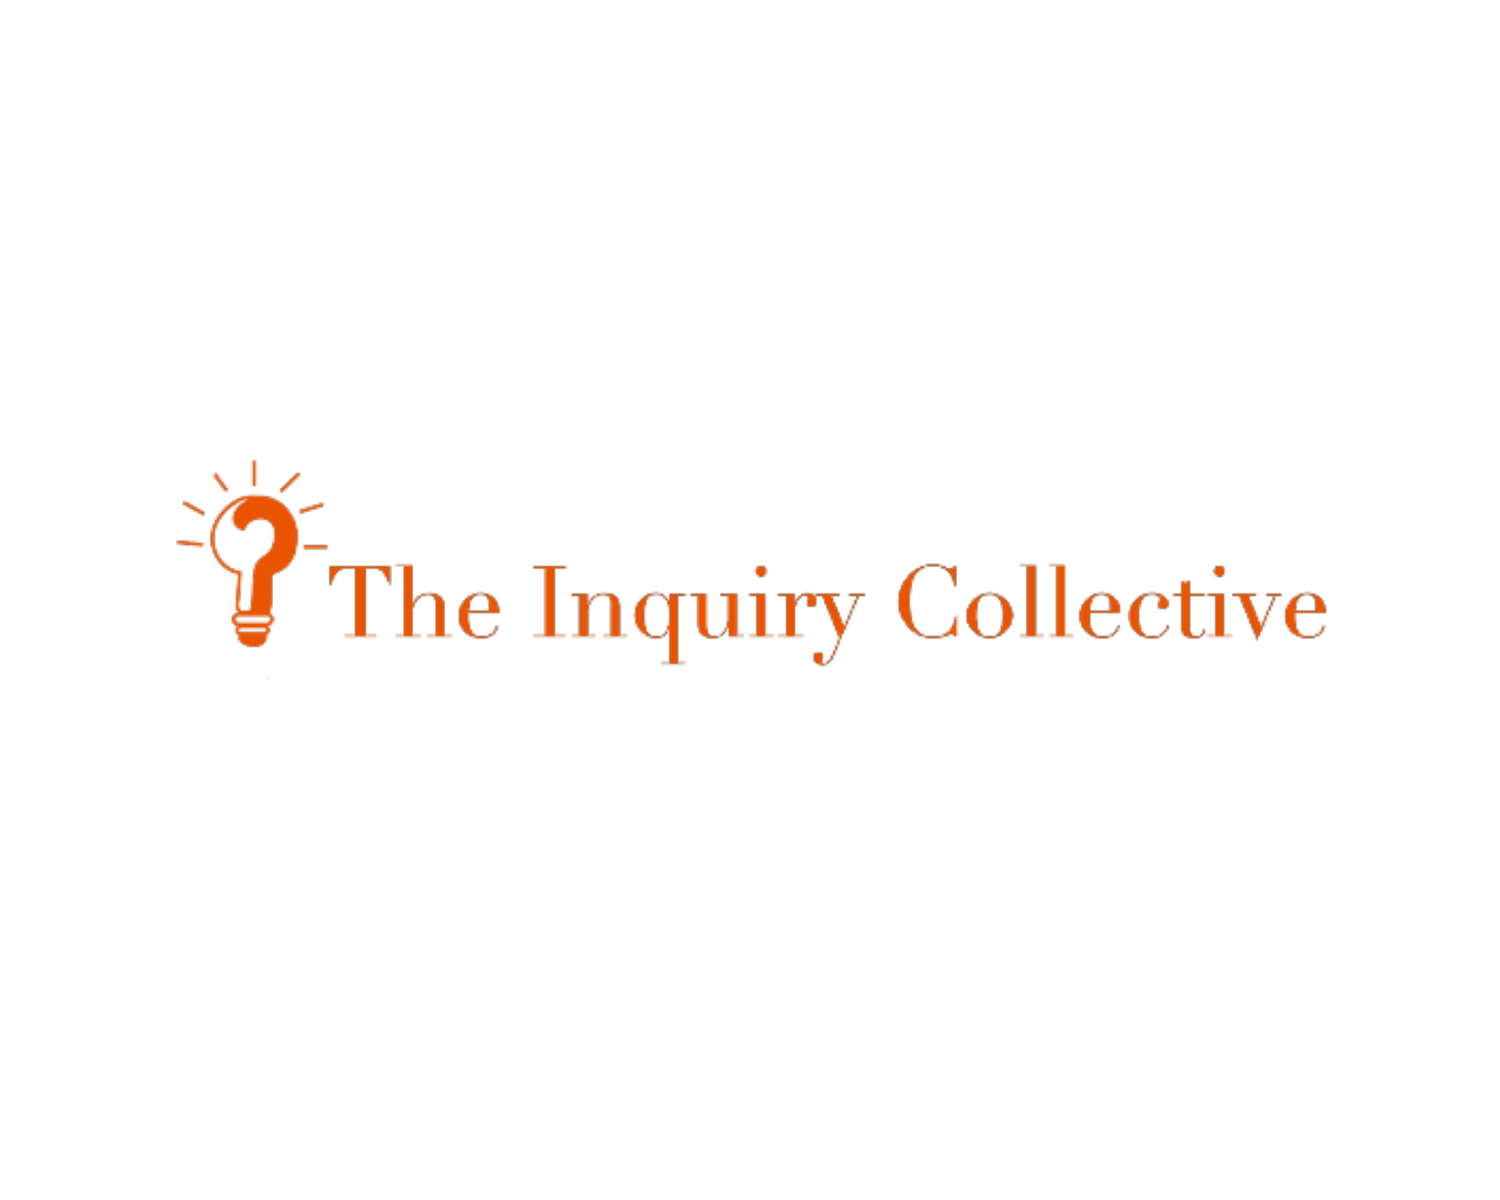 The Inquiry Collective